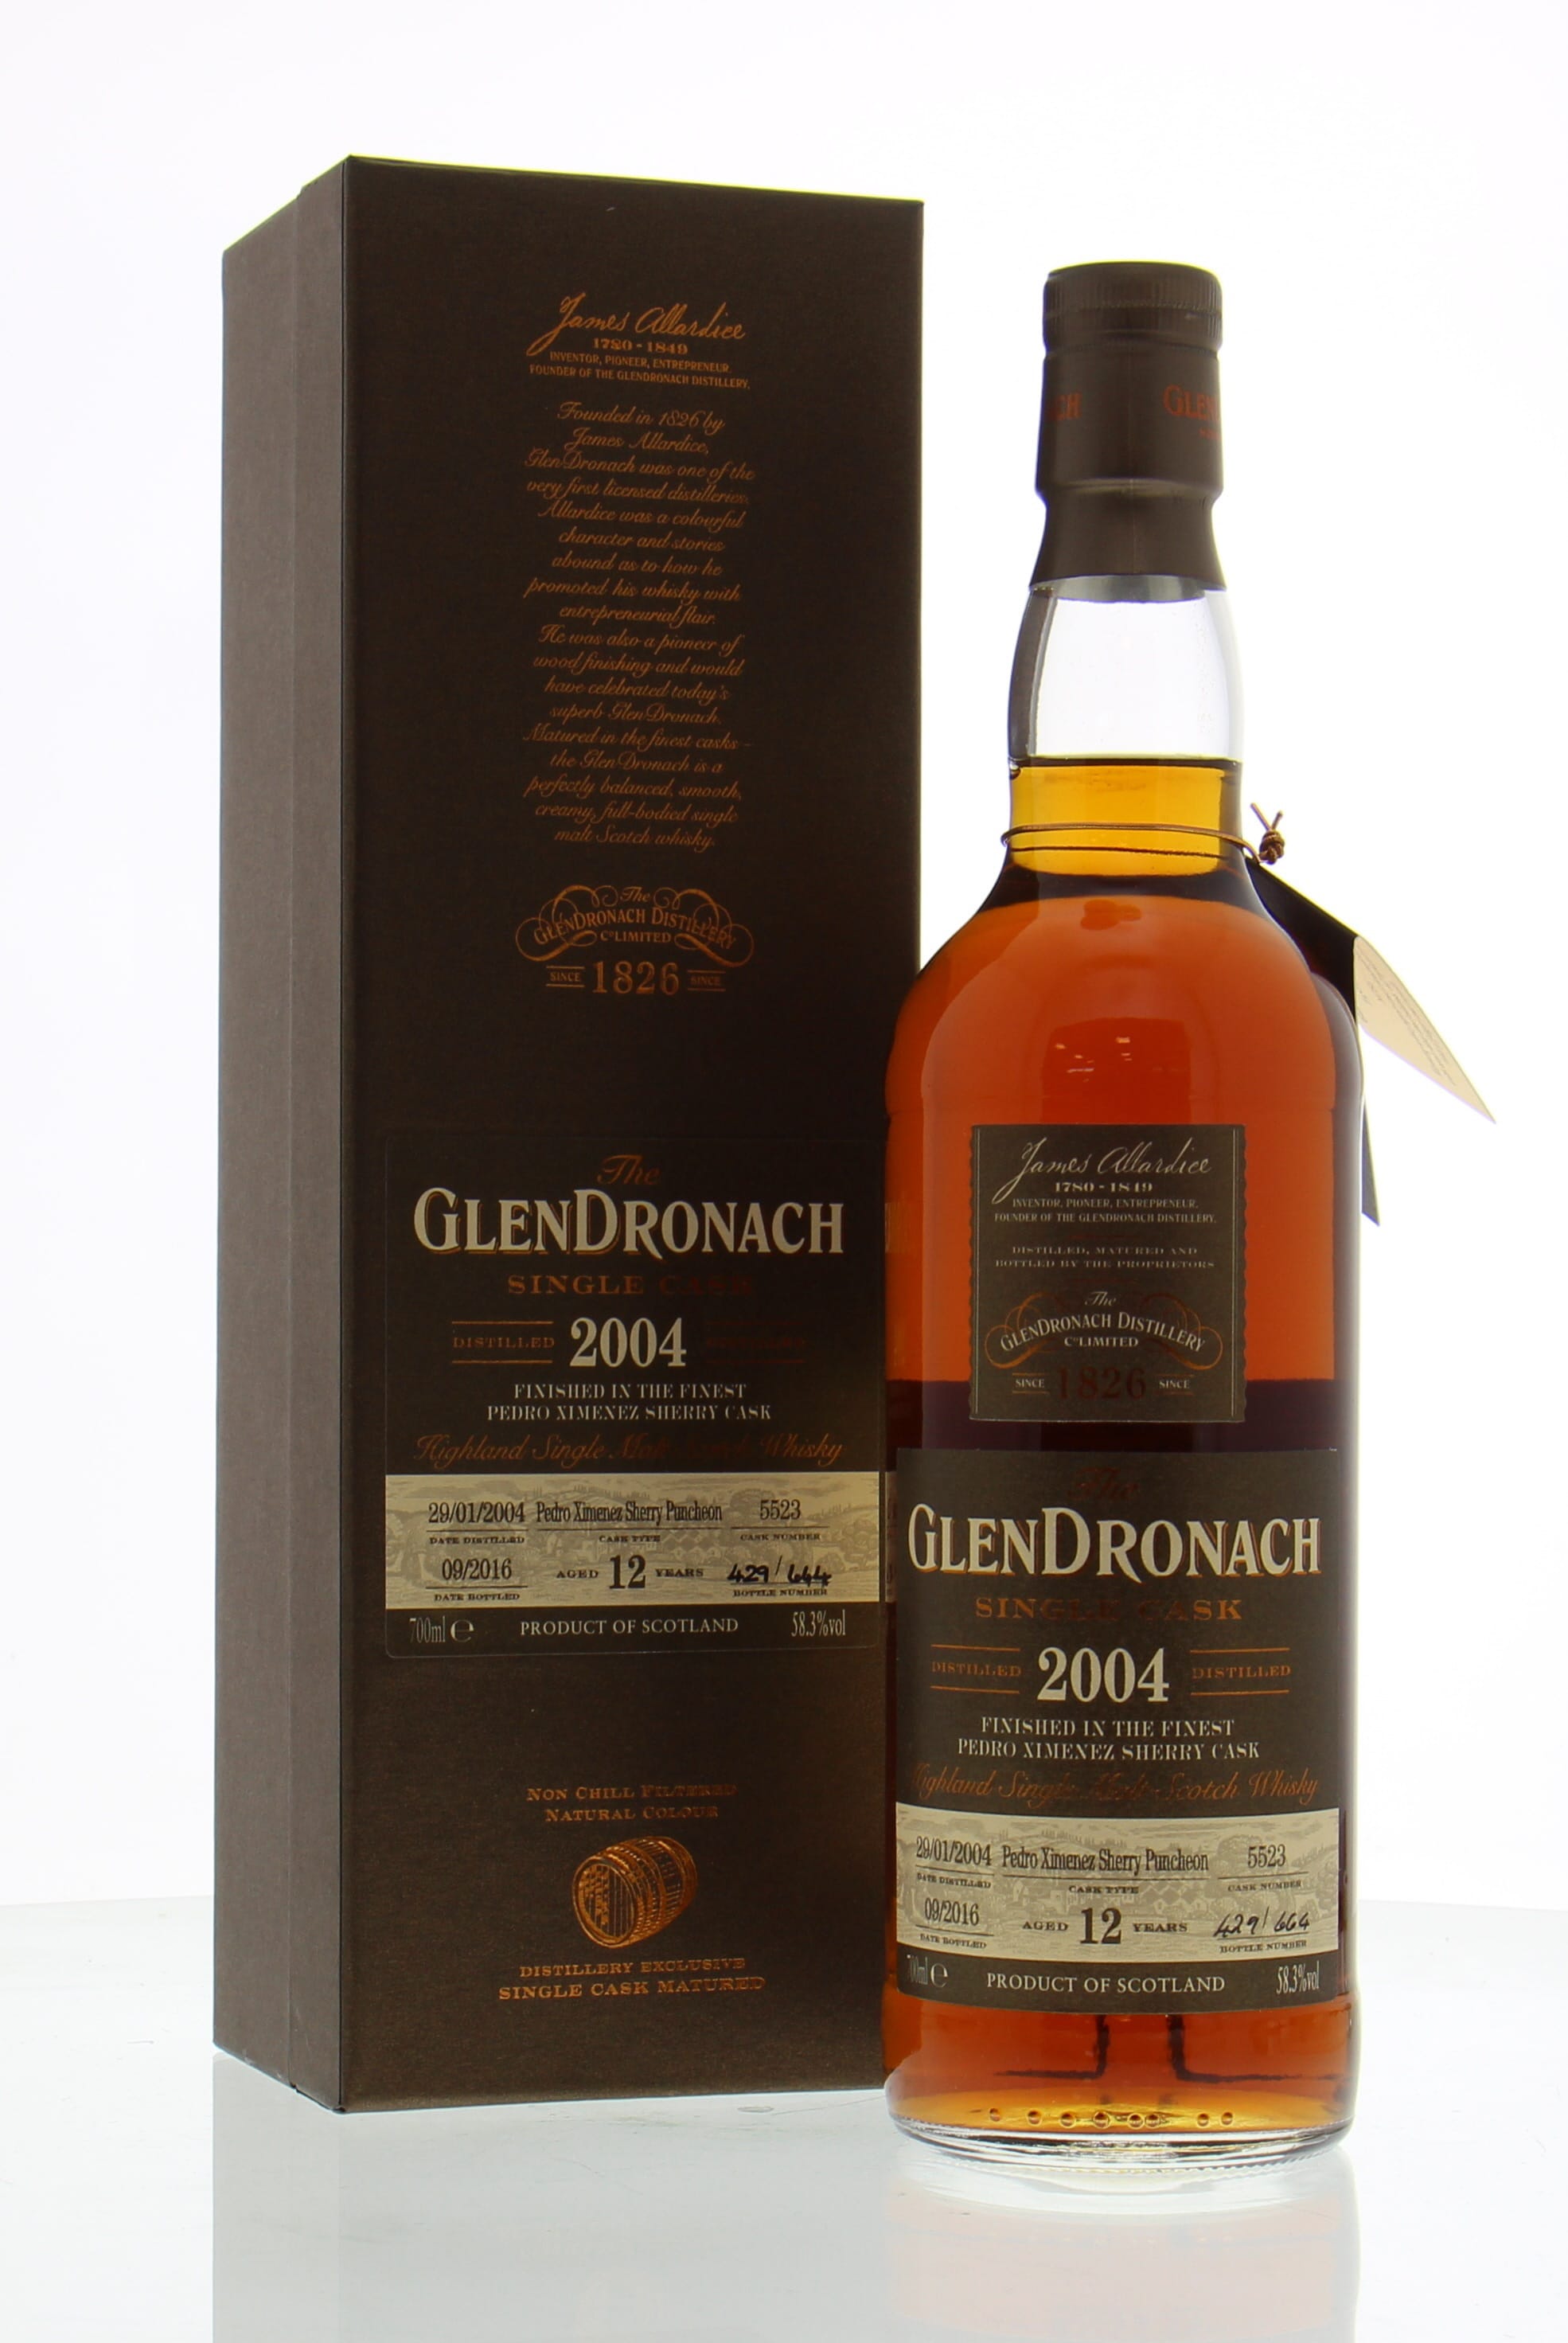 Glendronach - 12 Years Old Batch 14 Cask:5523 58.3% 2004 In Original Container